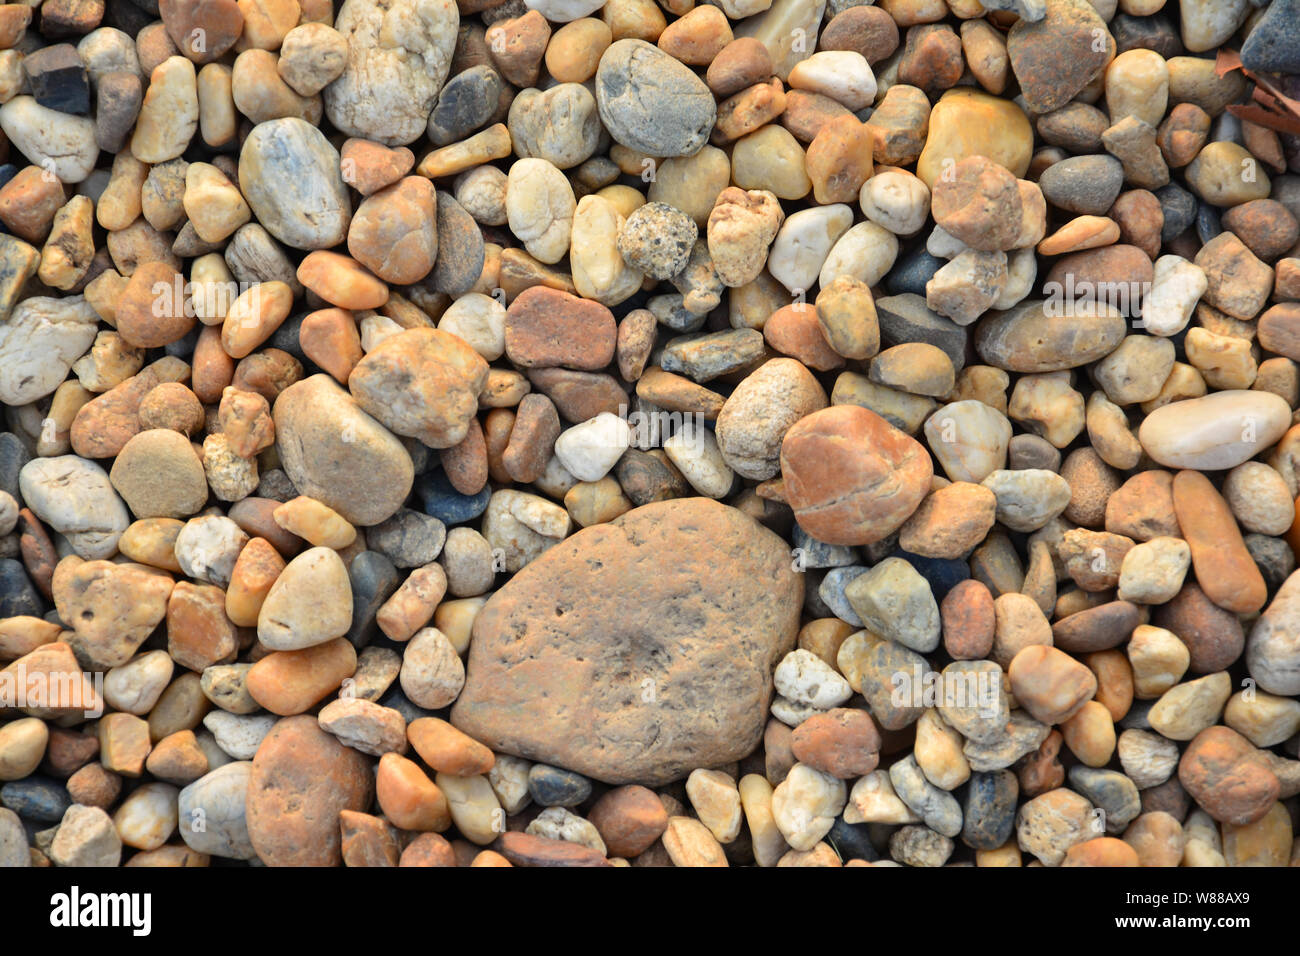 Colorful small pebbles or stone in garden Stock Photo